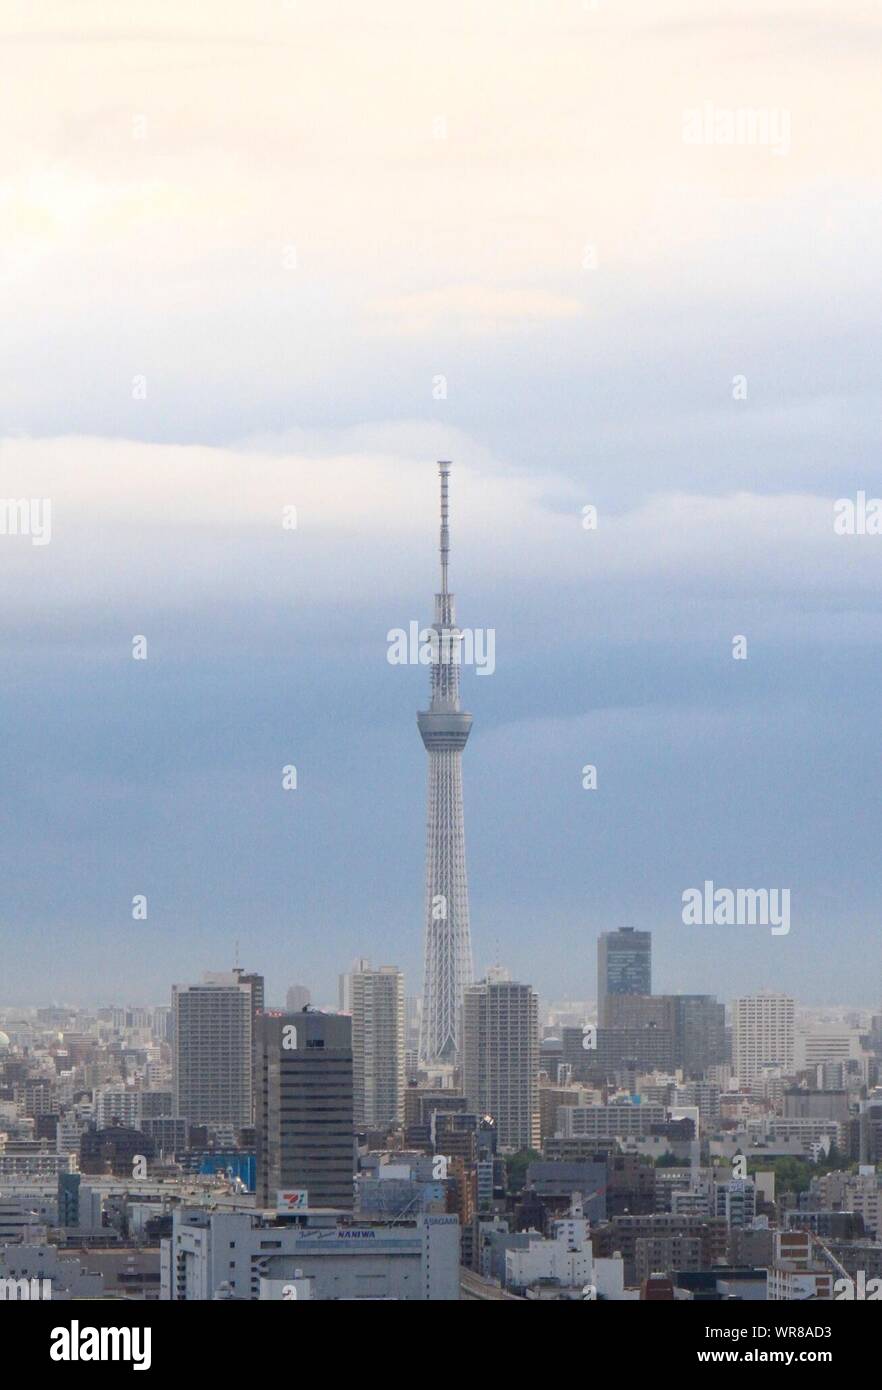 Cityscape With Tall Tower Stock Photo